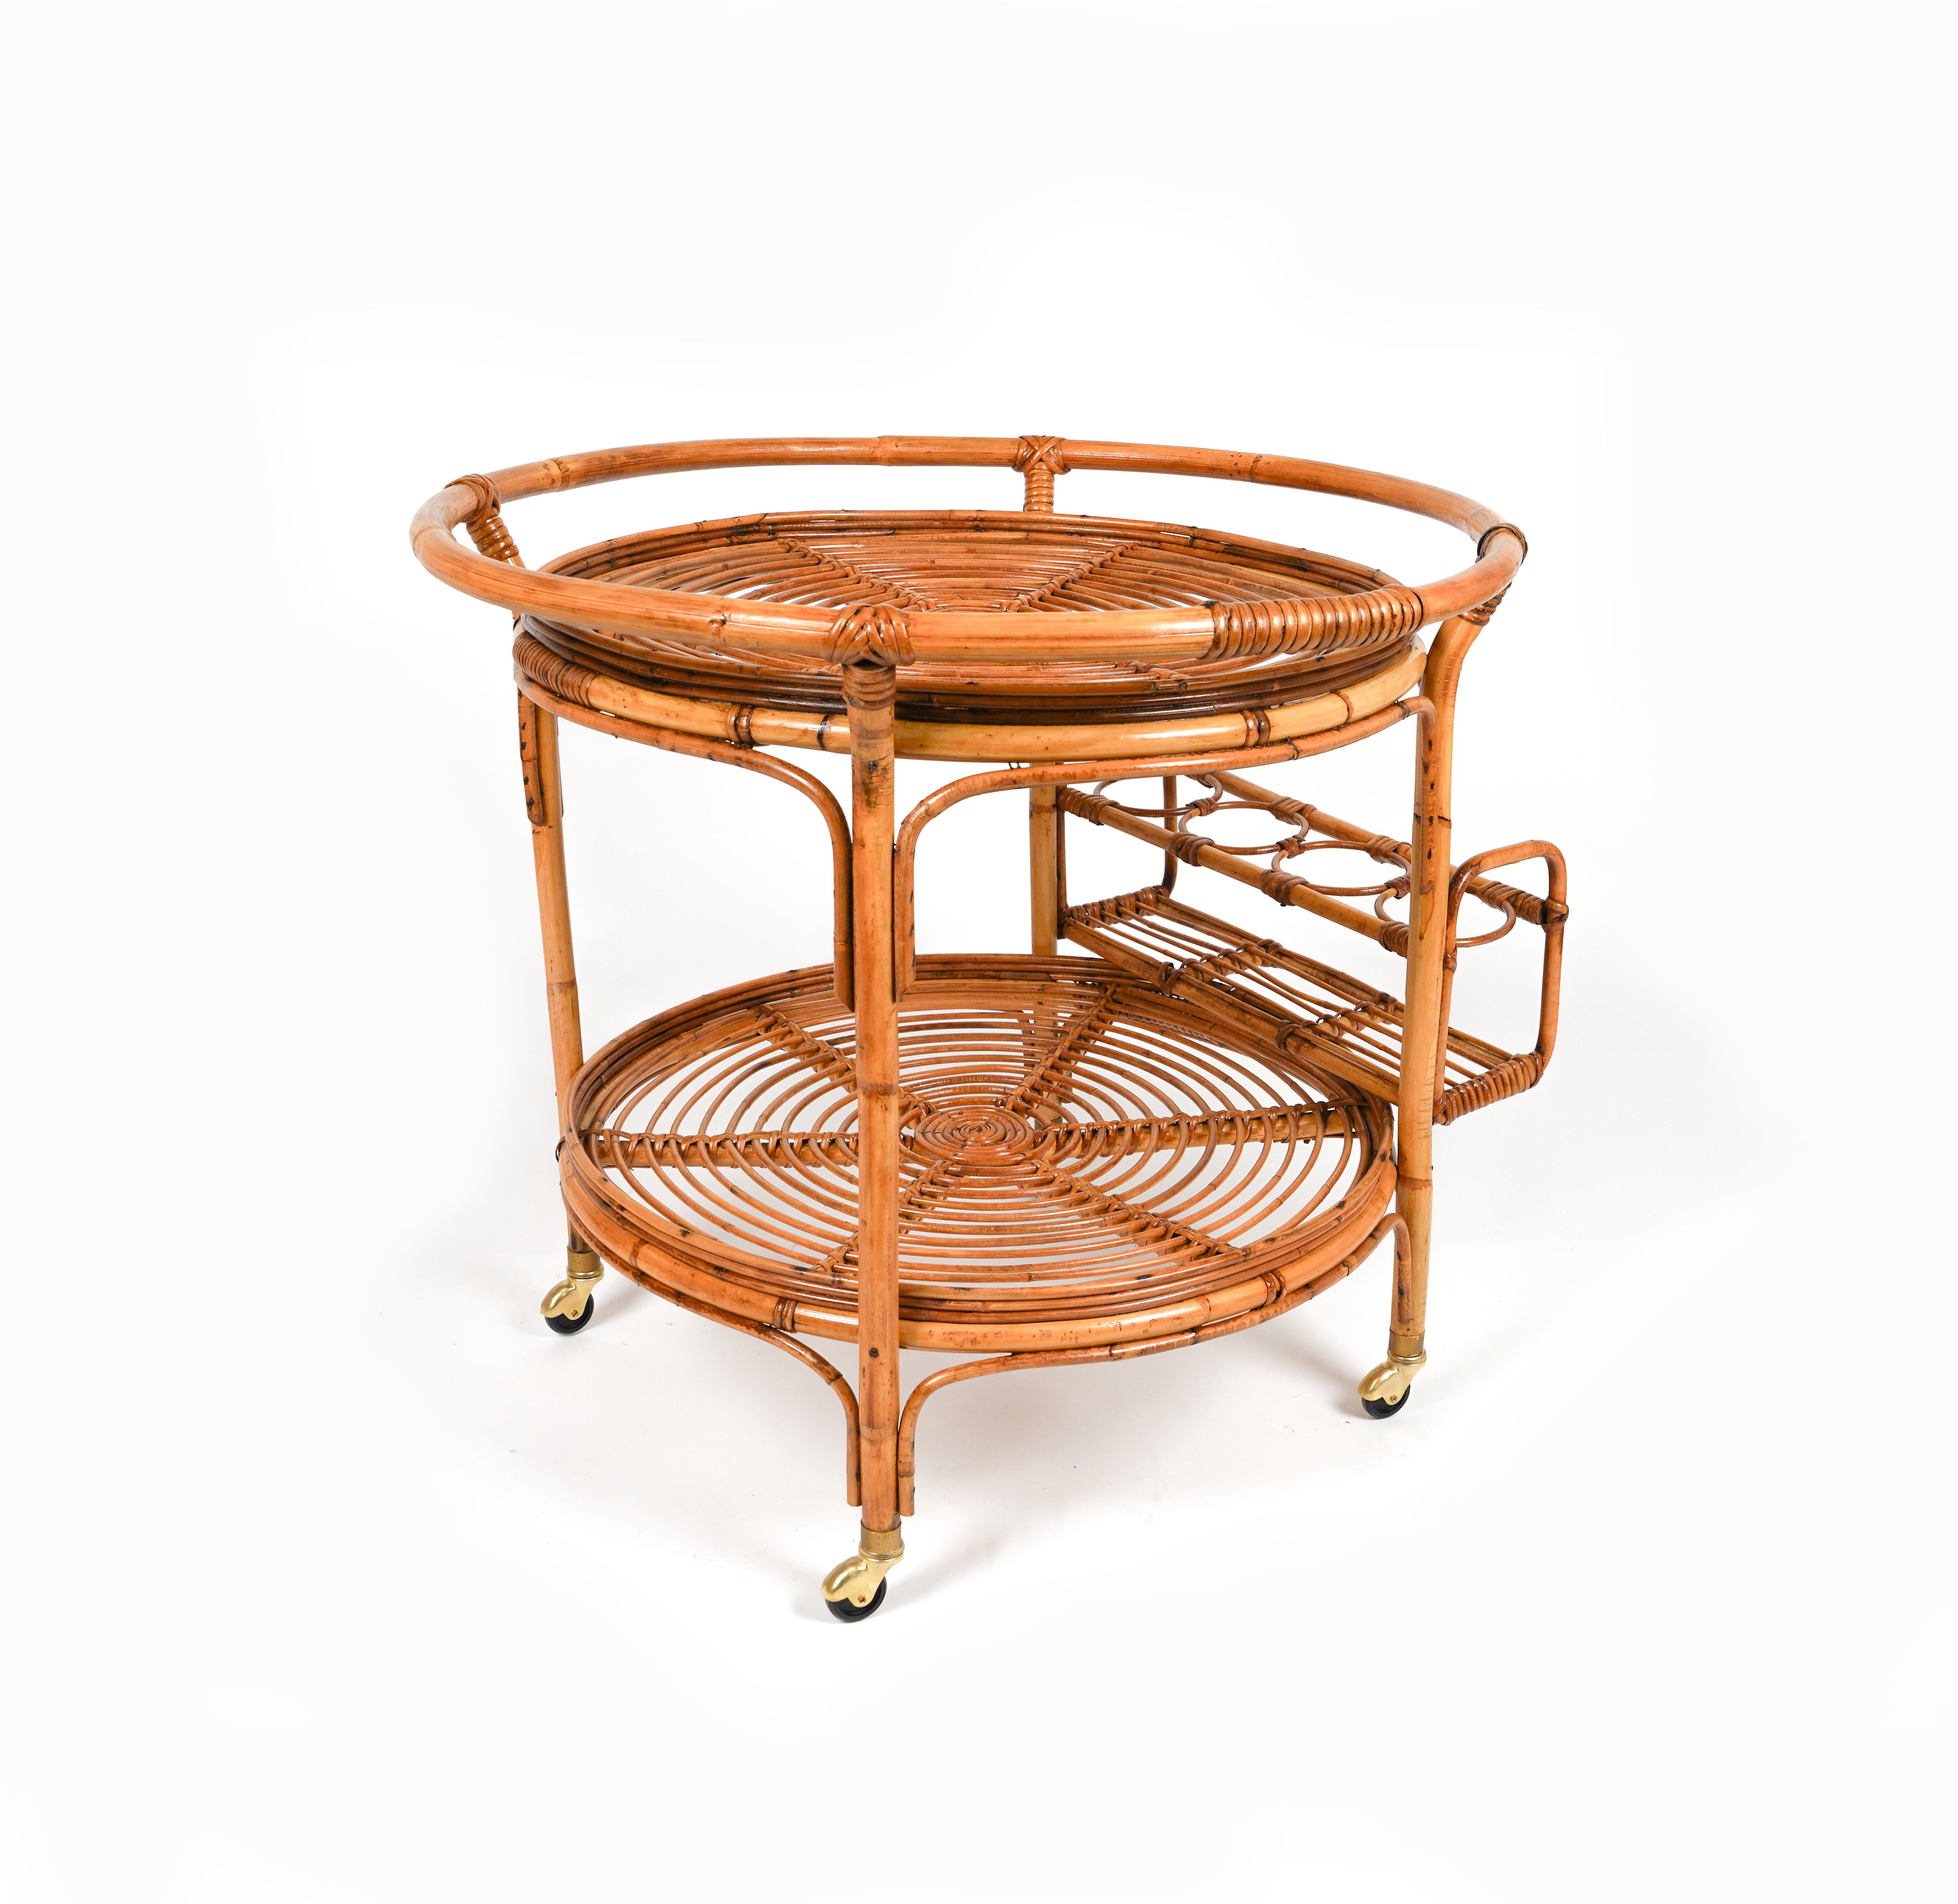 Italian Midcentury Rattan and Bamboo Round Serving Bar Cart Trolley, Italy 1960s For Sale